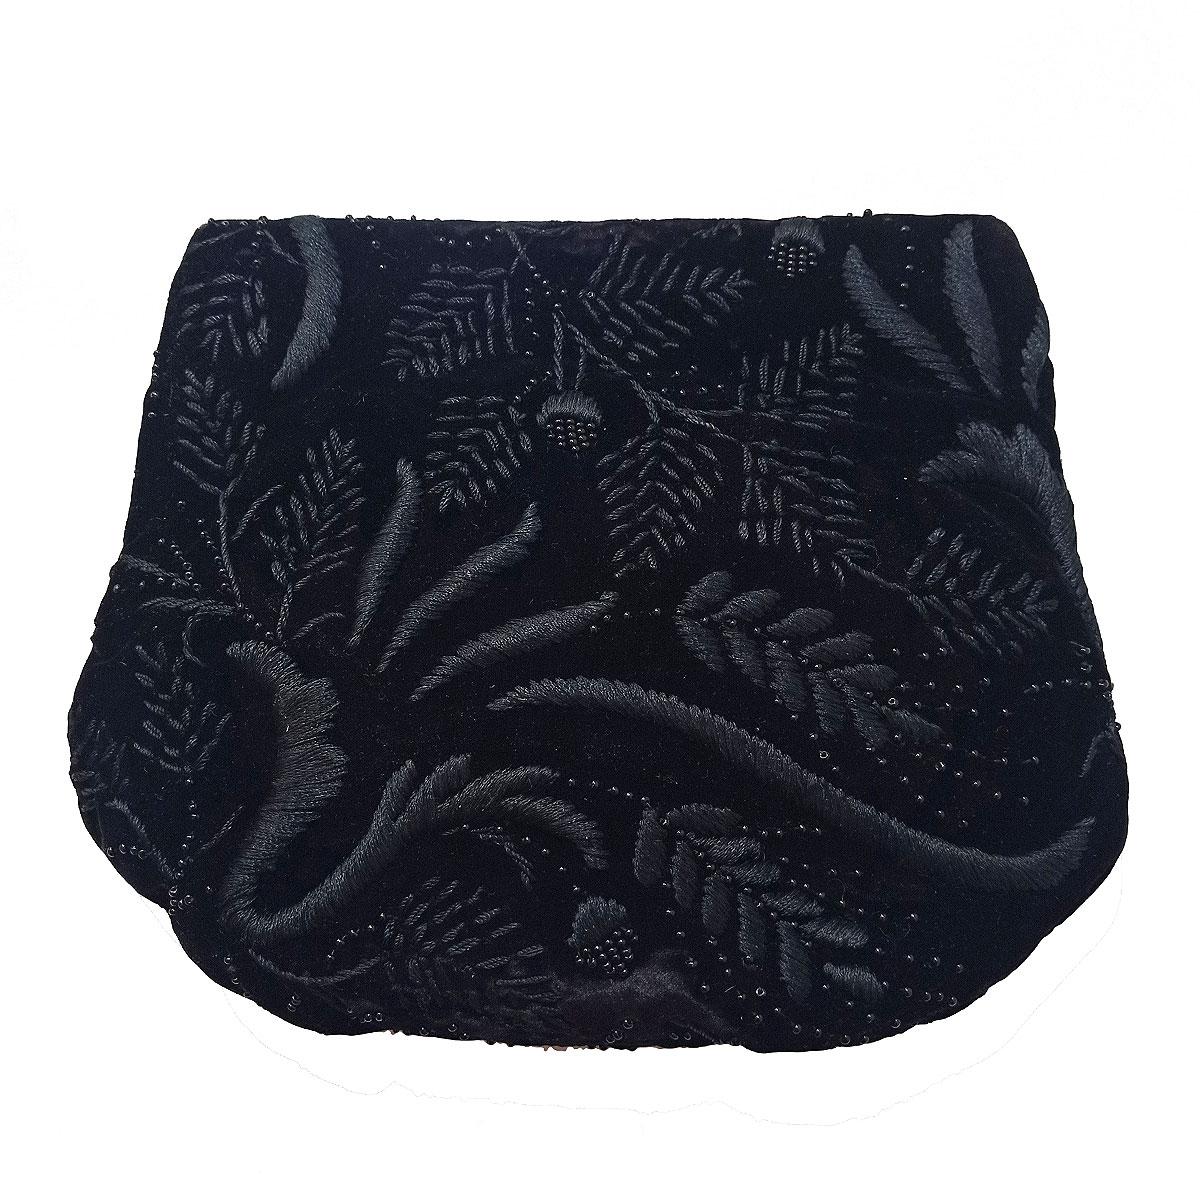 Rare and super chic Comolli Italy pochette
1930s Pochette
Vintage
1930s period
Velvet
Black color
Floral embroideries
Silk internal
Small internal pocket
Cm 20 x 15 (7,87 x 5,9 inches)
Worldwide express shipping included in the price !